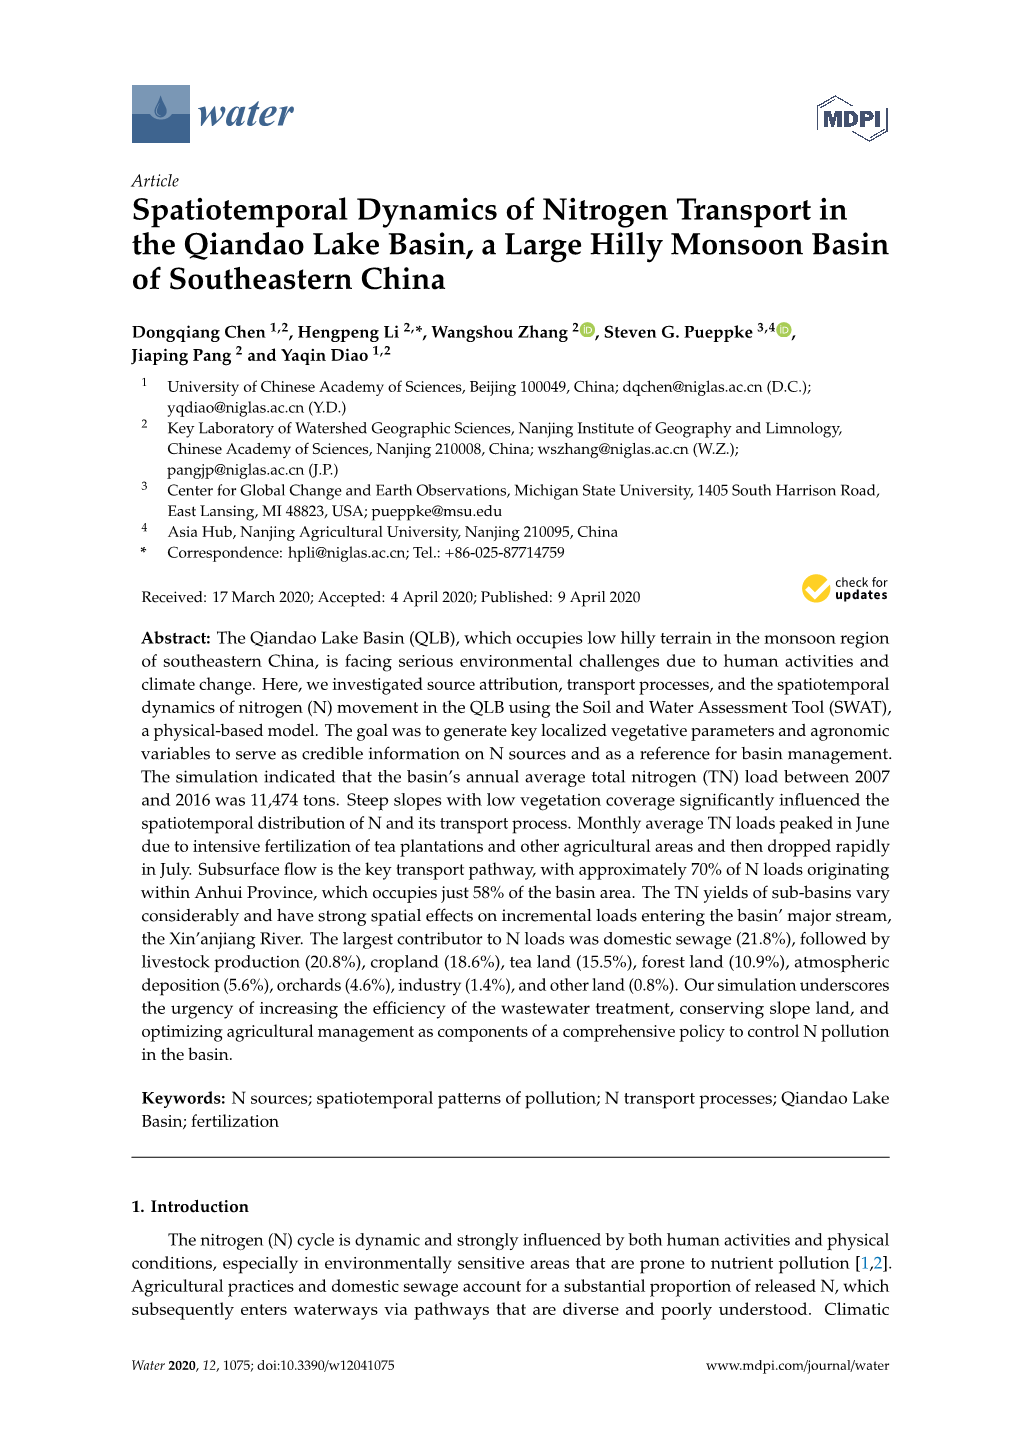 Spatiotemporal Dynamics of Nitrogen Transport in the Qiandao Lake Basin, a Large Hilly Monsoon Basin of Southeastern China